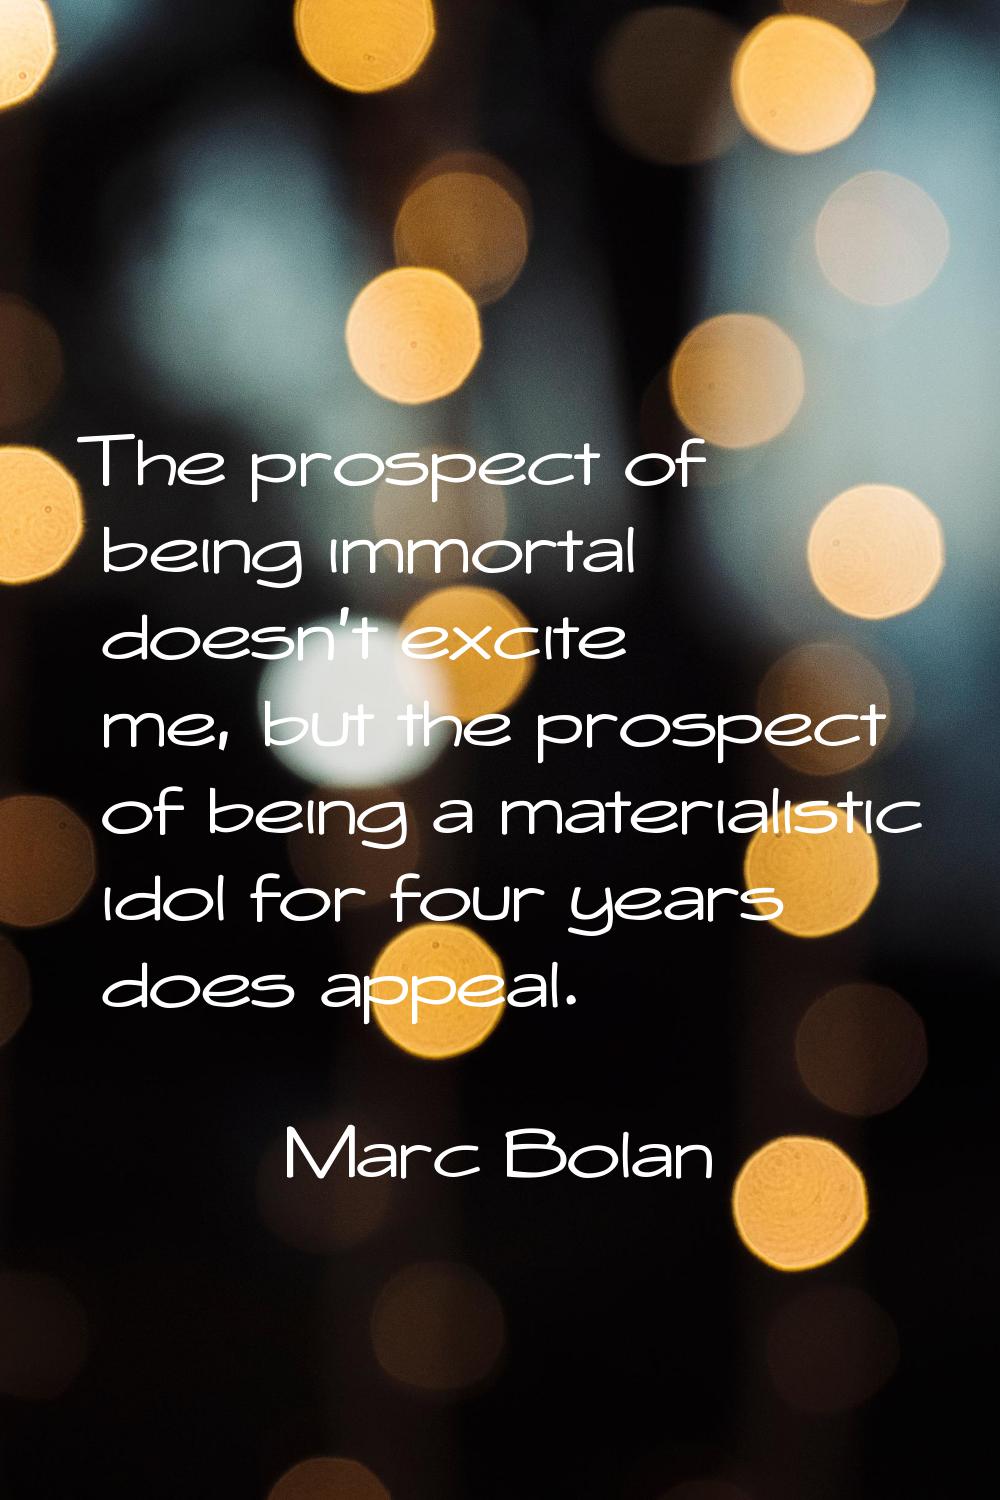 The prospect of being immortal doesn't excite me, but the prospect of being a materialistic idol fo